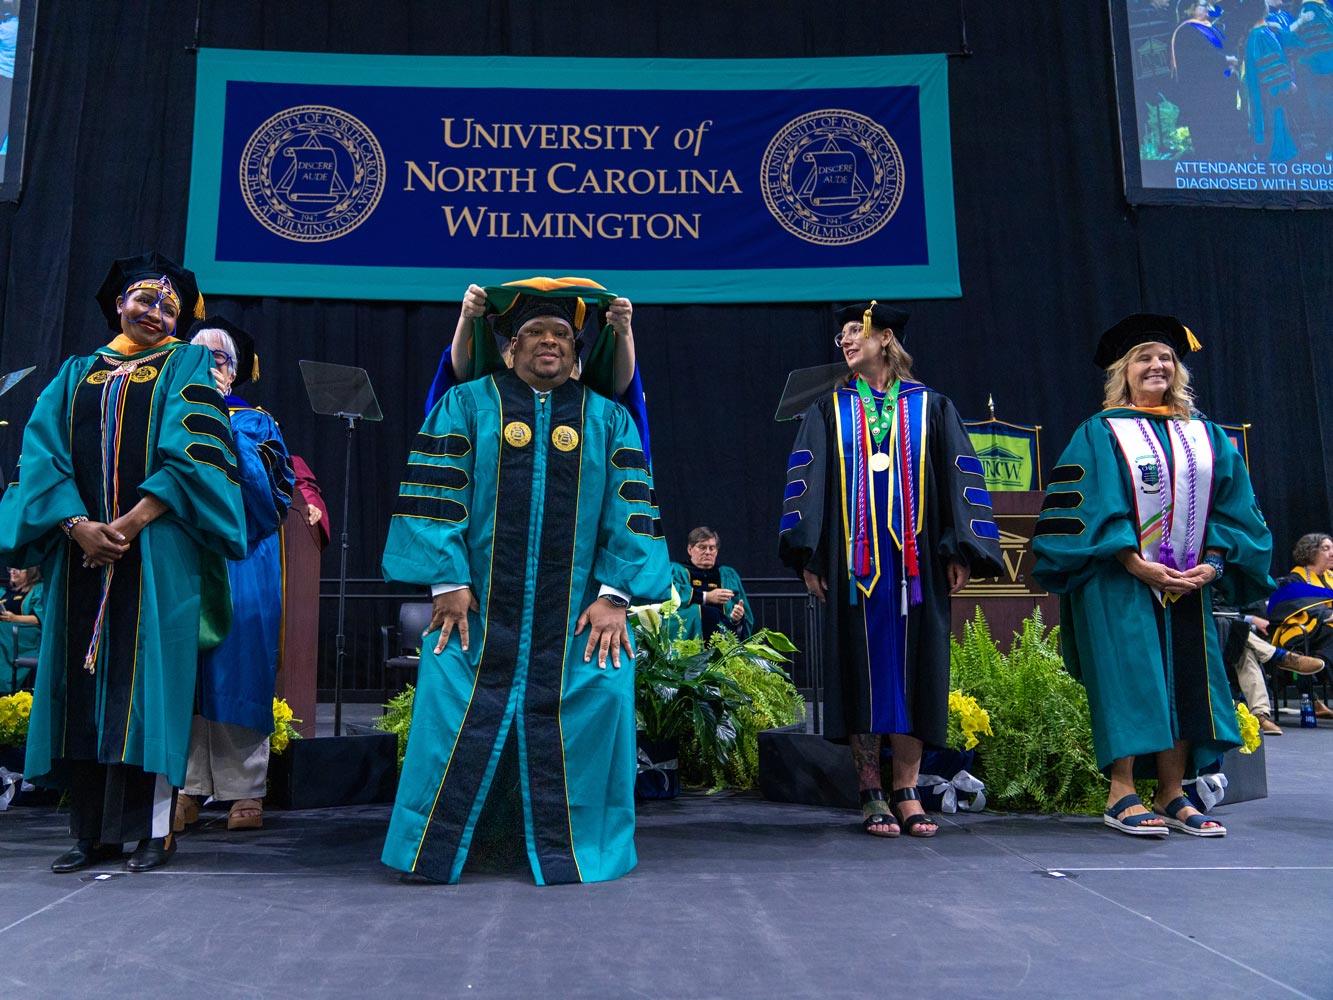 Four DNP students wearing commencement robes and caps stand on the stage to receive their doctoral hoods.